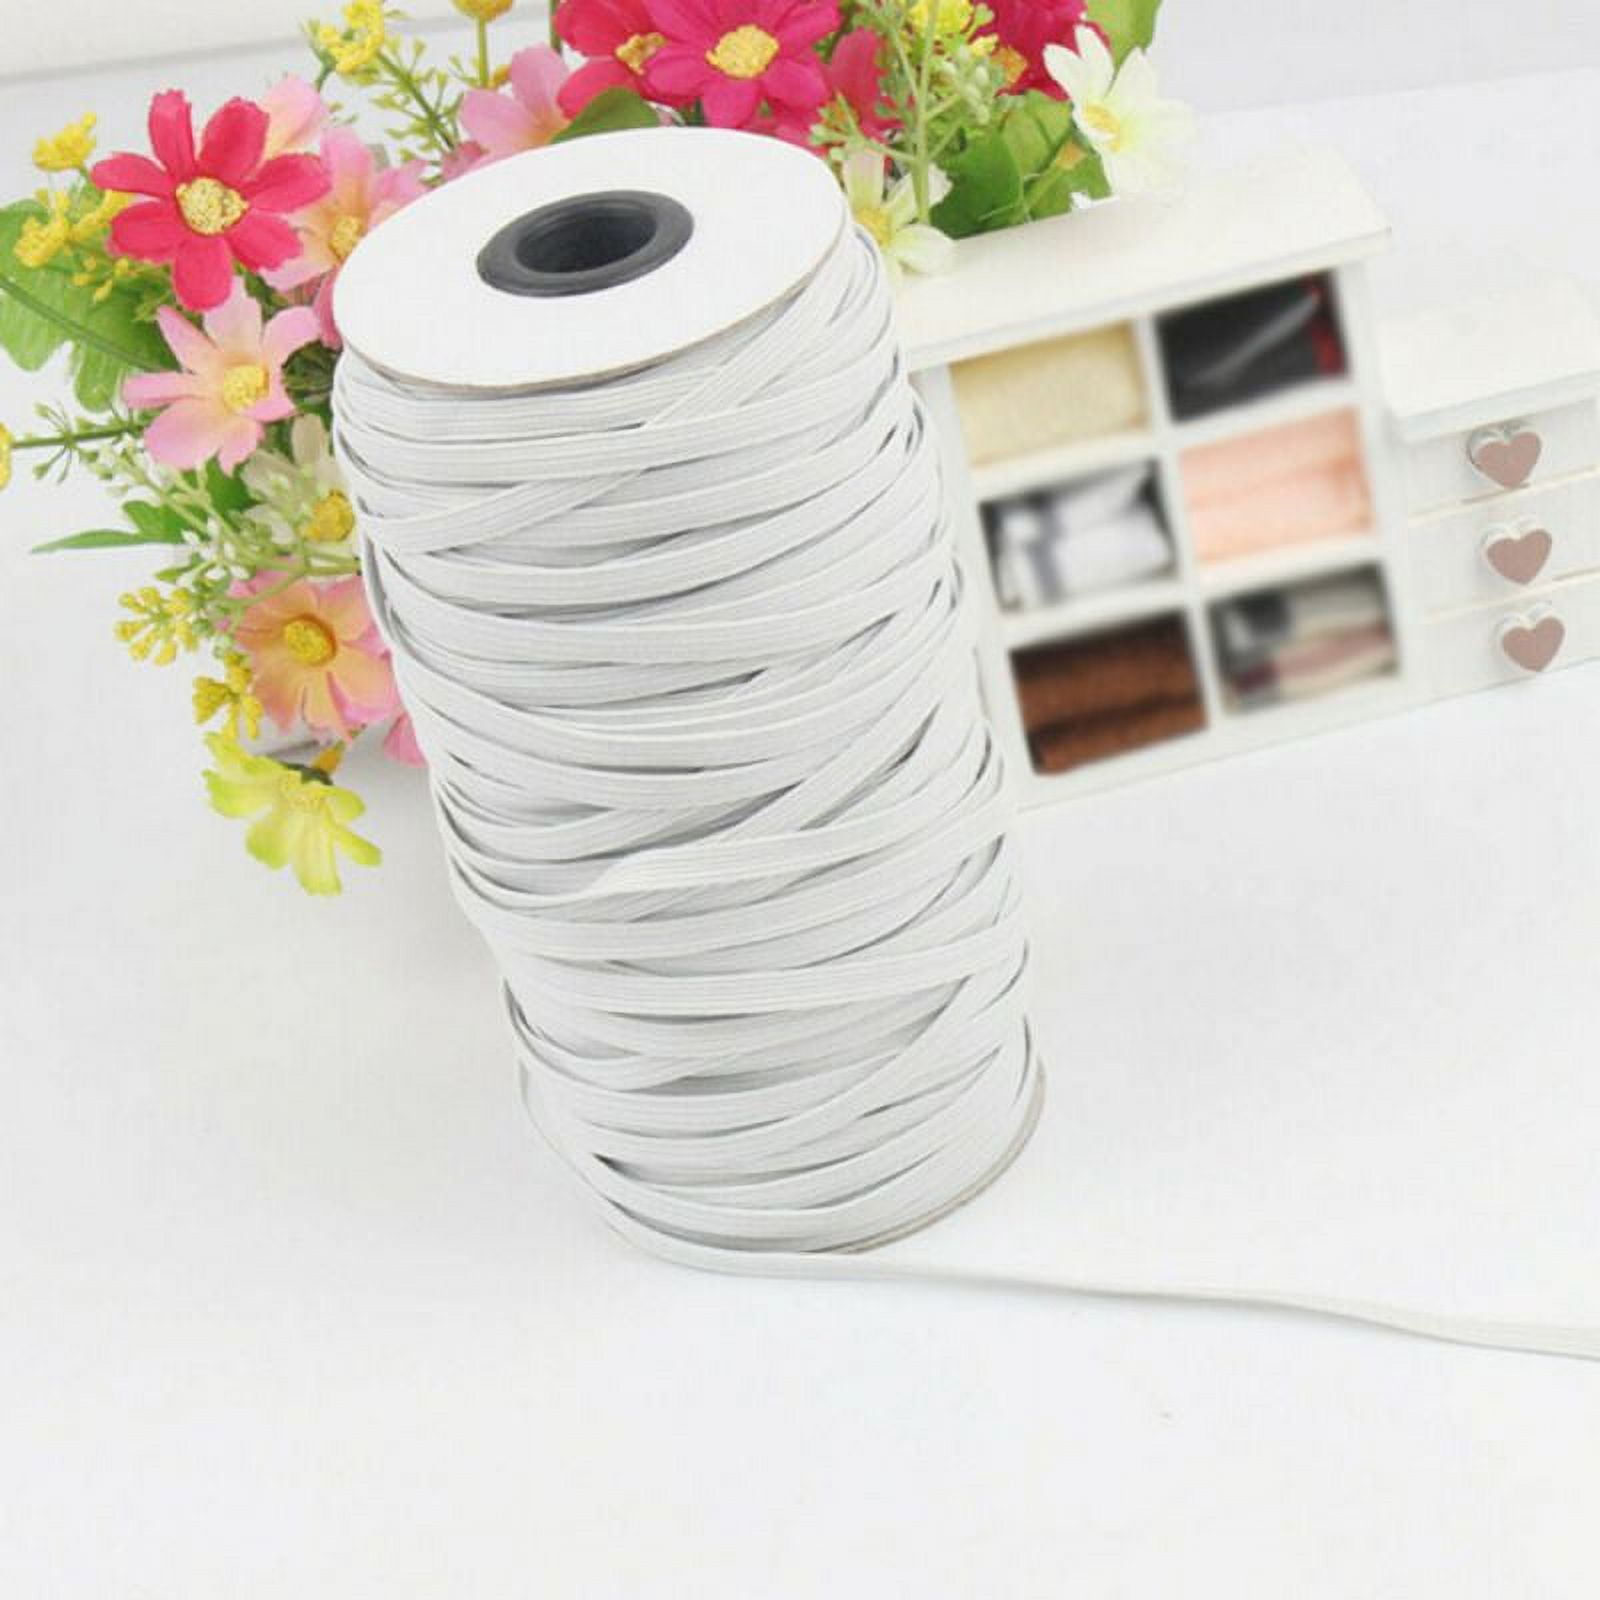 HANFINEE 1 Inch Wide Sew on Elastic Band Knitted Elastic with Heavy Stretch  for Sewing Crafts DIY,Waistband,Bedspread,Cuff (White,15 Yards)